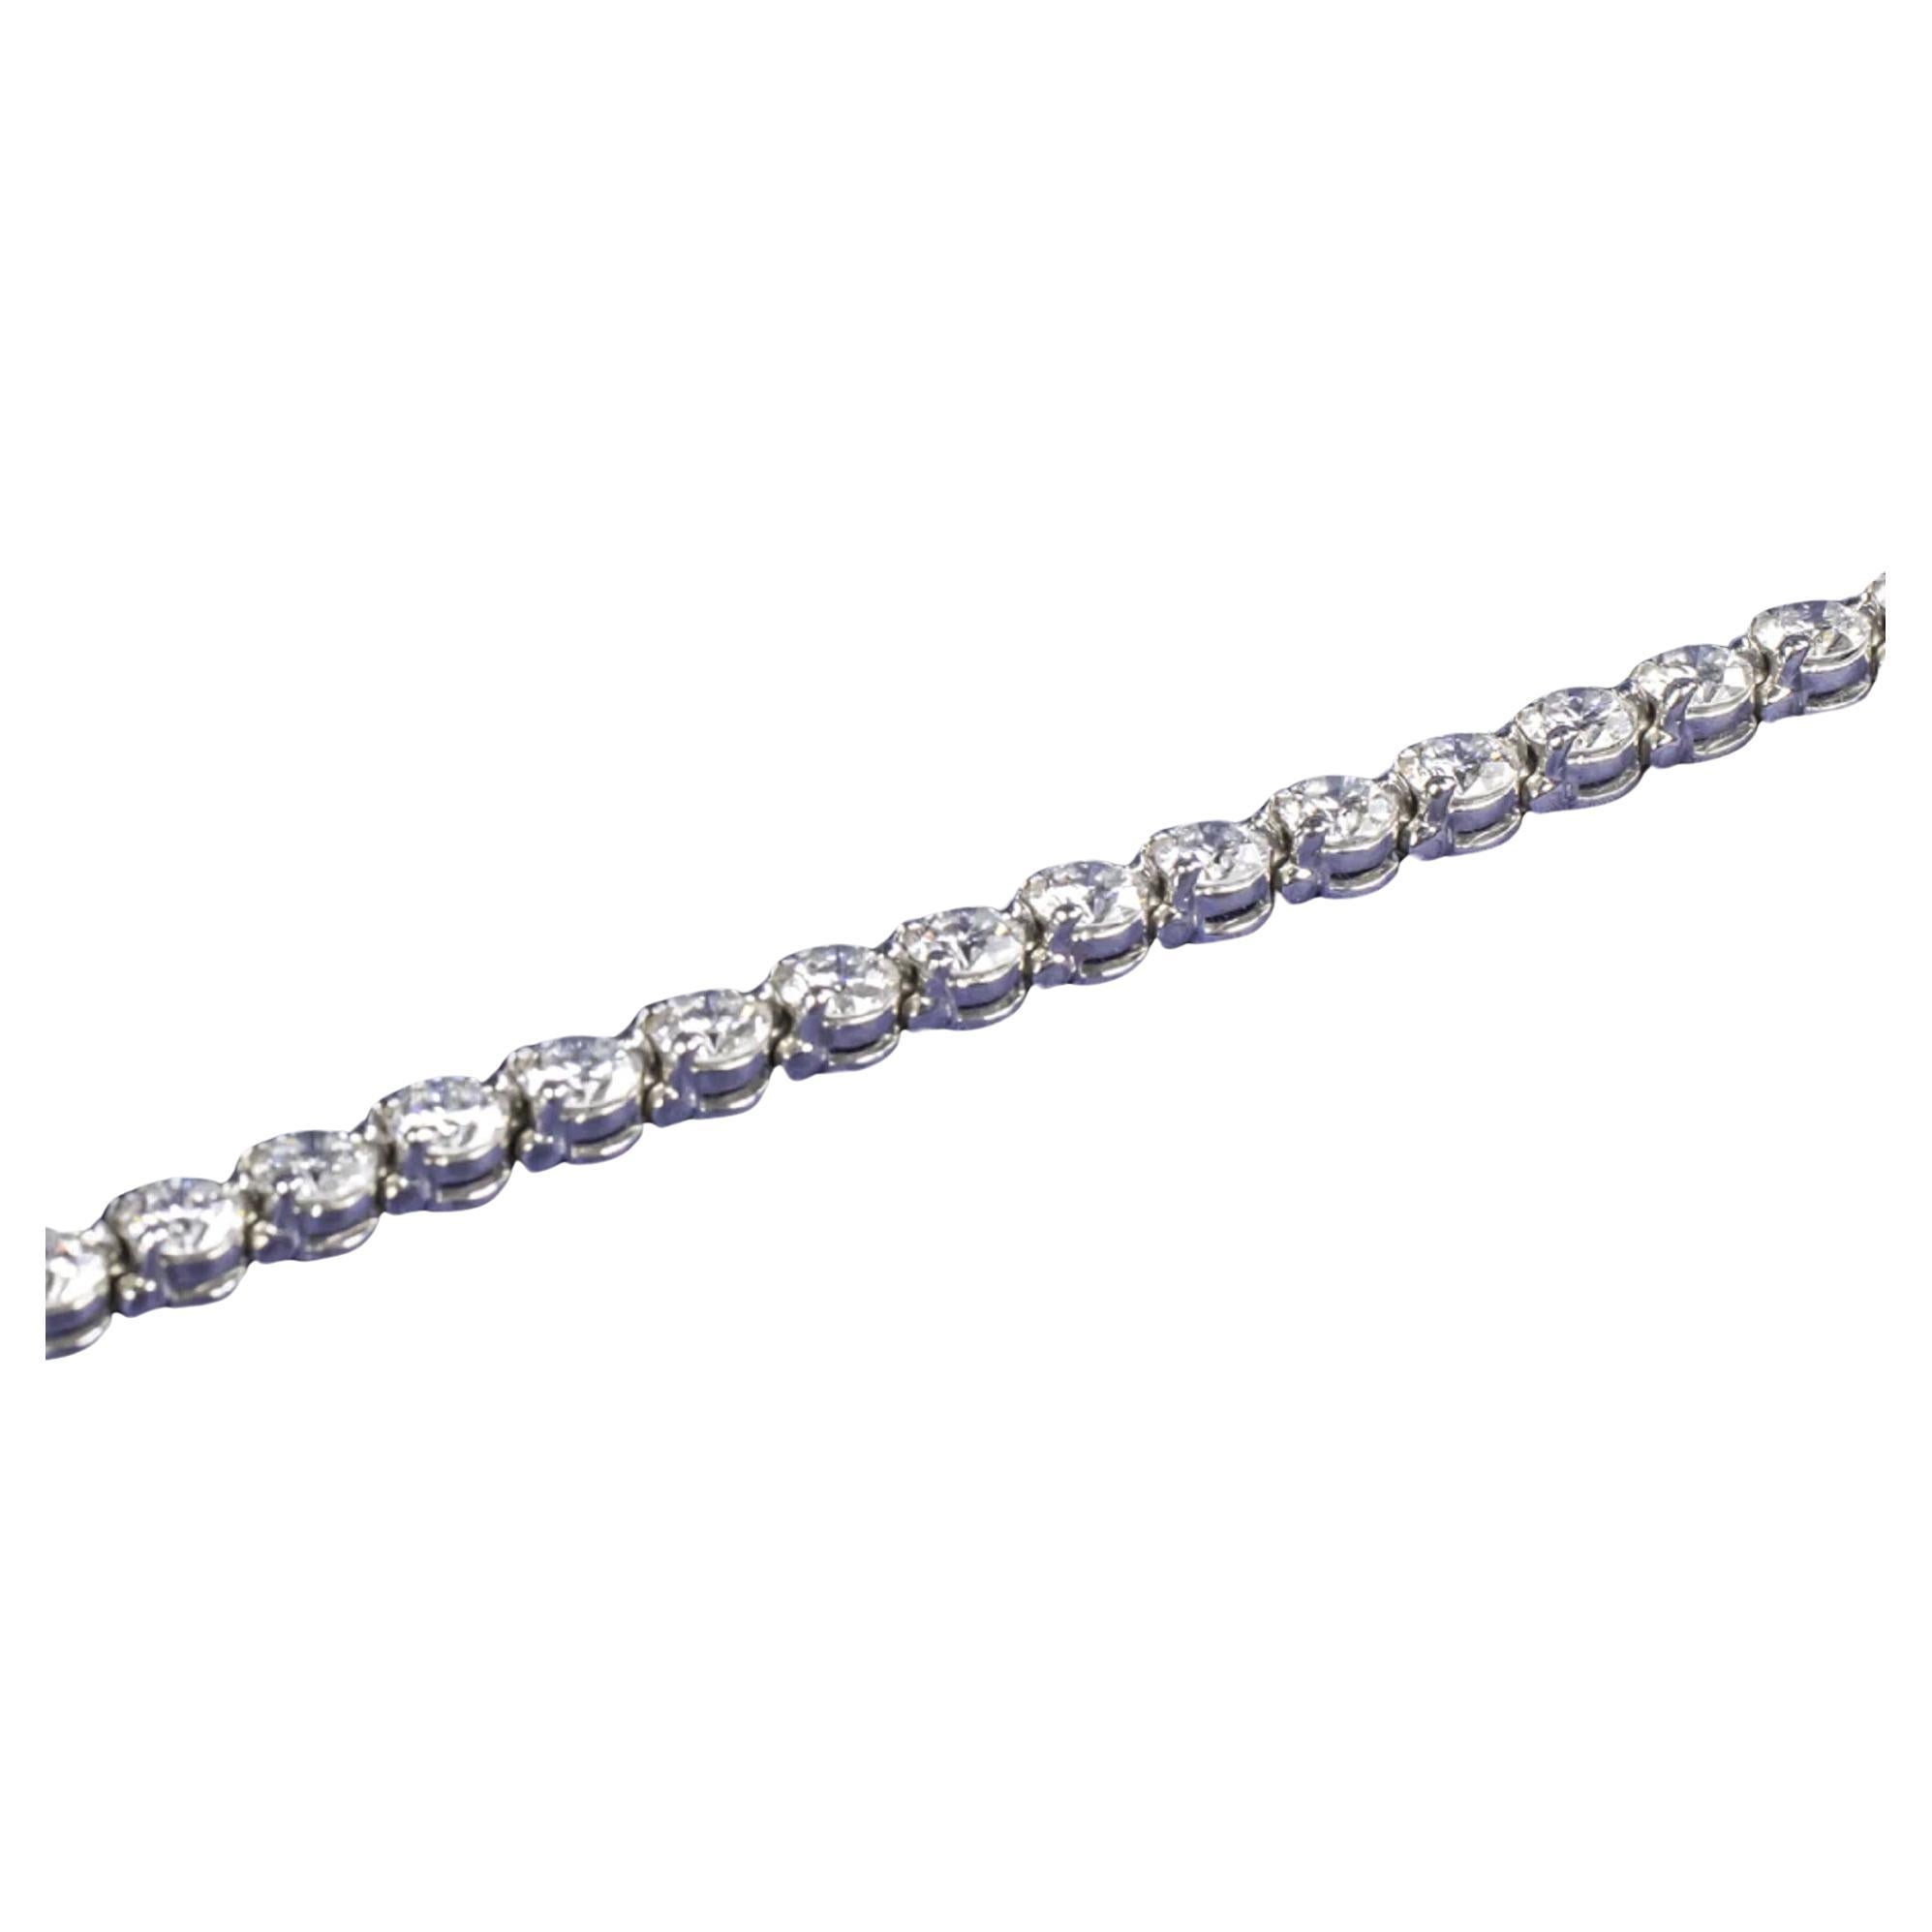 This authentic Tiffany diamond bracelet is substantial and absolutely fantastic quality! A diamond tennis bracelet is a time tested look that will always be in style! 
Highlights:
- 4.49 carats of diamonds for fantastic, substantial sparkle!
- The